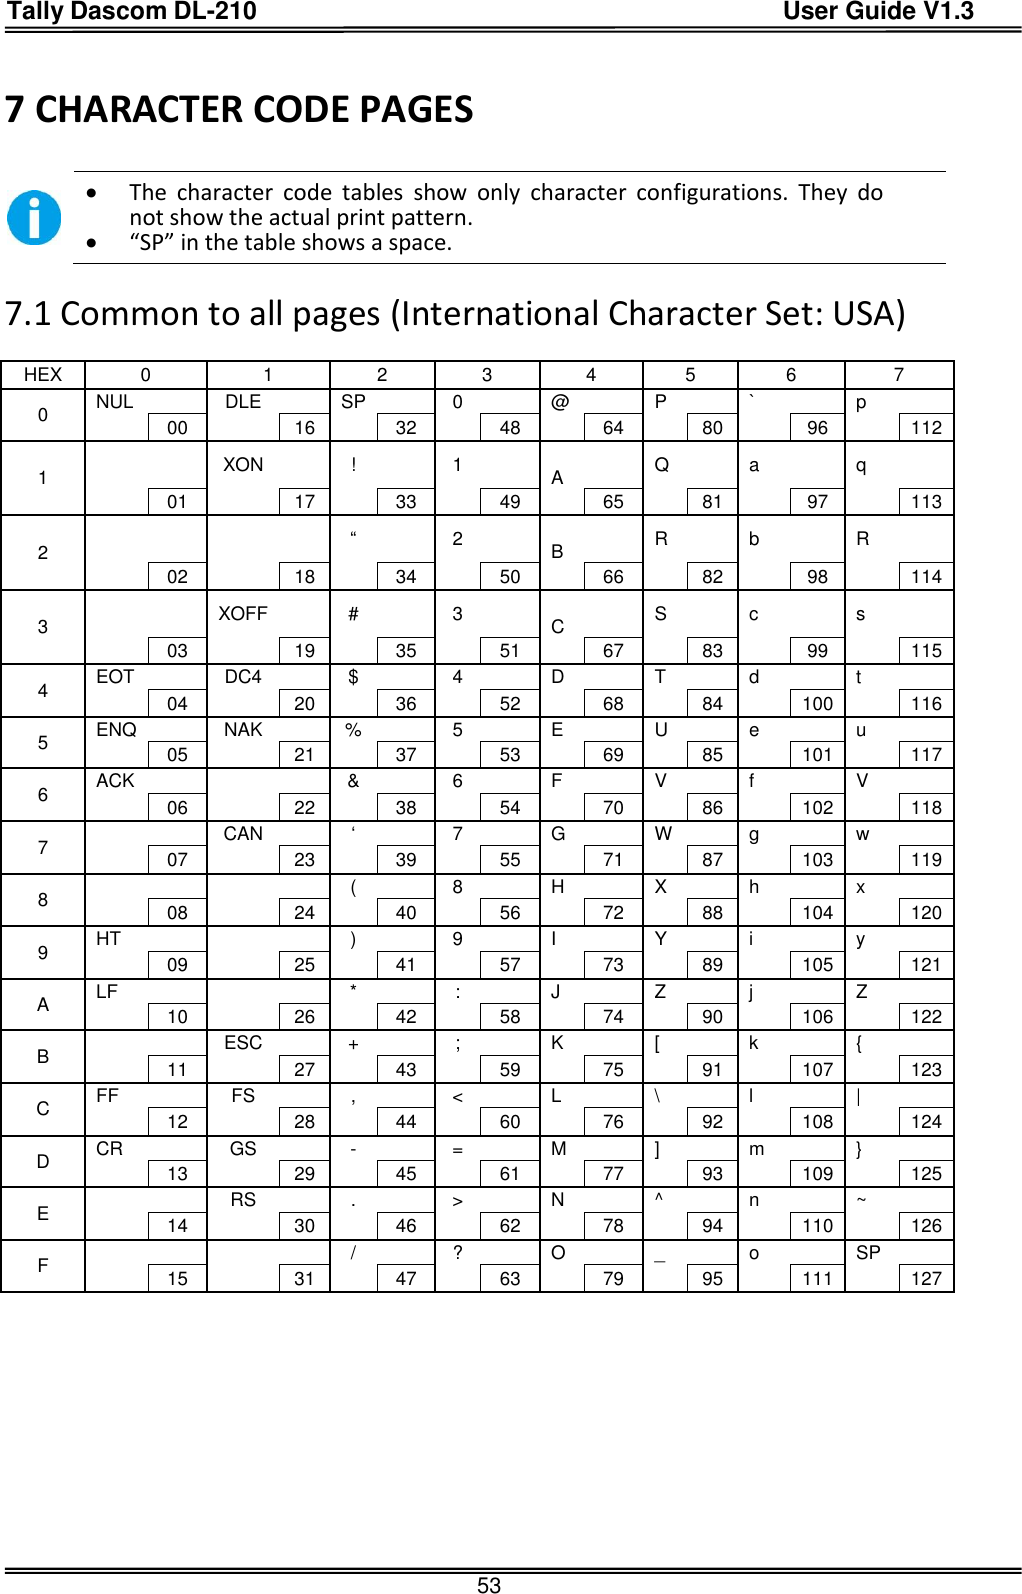 Tally Dascom DL-210                                          User Guide V1.3  53 7 CHARACTER CODE PAGES     The  character  code  tables  show  only  character  configurations.  They  do not show the actual print pattern.  “SP” in the table shows a space.  7.1 Common to all pages (International Character Set: USA)  HEX 0 1 2 3 4 5 6 7 0 NUL    DLE    SP    0    @    P    `    p      00  16   32  48   64  80   96  112 1     XON    !    1     A   Q    a    q      01   17   33   49   65   81   97   113 2        “    2    B   R   b    R     02  18   34  50   66  82   98  114 3     XOFF    #    3     C   S    c    s      03   19   35   51   67   83   99   115 4 EOT    DC4   $    4   D    T   d    t     04  20   36  52   68  84   100  116 5 ENQ    NAK    %    5    E    U    e    u      05   21   37   53   69   85   101   117 6 ACK       &amp;    6   F    V   f    V     06  22   38  54   70  86   102  118 7     CAN    ‘    7    G    W    g    w      07   23   39   55   71   87   103   119 8        (    8   H    X   h    x     08  24   40  56   72  88   104  120 9 HT        )    9    I    Y    i    y      09   25   41   57   73   89   105   121 A LF       *    :   J    Z   j    Z     10  26   42  58   74  90   106  122 B     ESC    +    ;    K    [    k    {      11   27   43   59   75   91   107   123 C FF    FS   ,    &lt;   L    \   l    |     12  28   44  60   76  92   108  124 D CR    GS    -    =    M    ]    m    }      13   29   45   61   77   93   109   125 E     RS   .    &gt;   N    ^   n    ~     14  30   46  62   78  94   110  126 F         /    ?    O    _    o    SP      15   31   47   63   79   95   111   127      